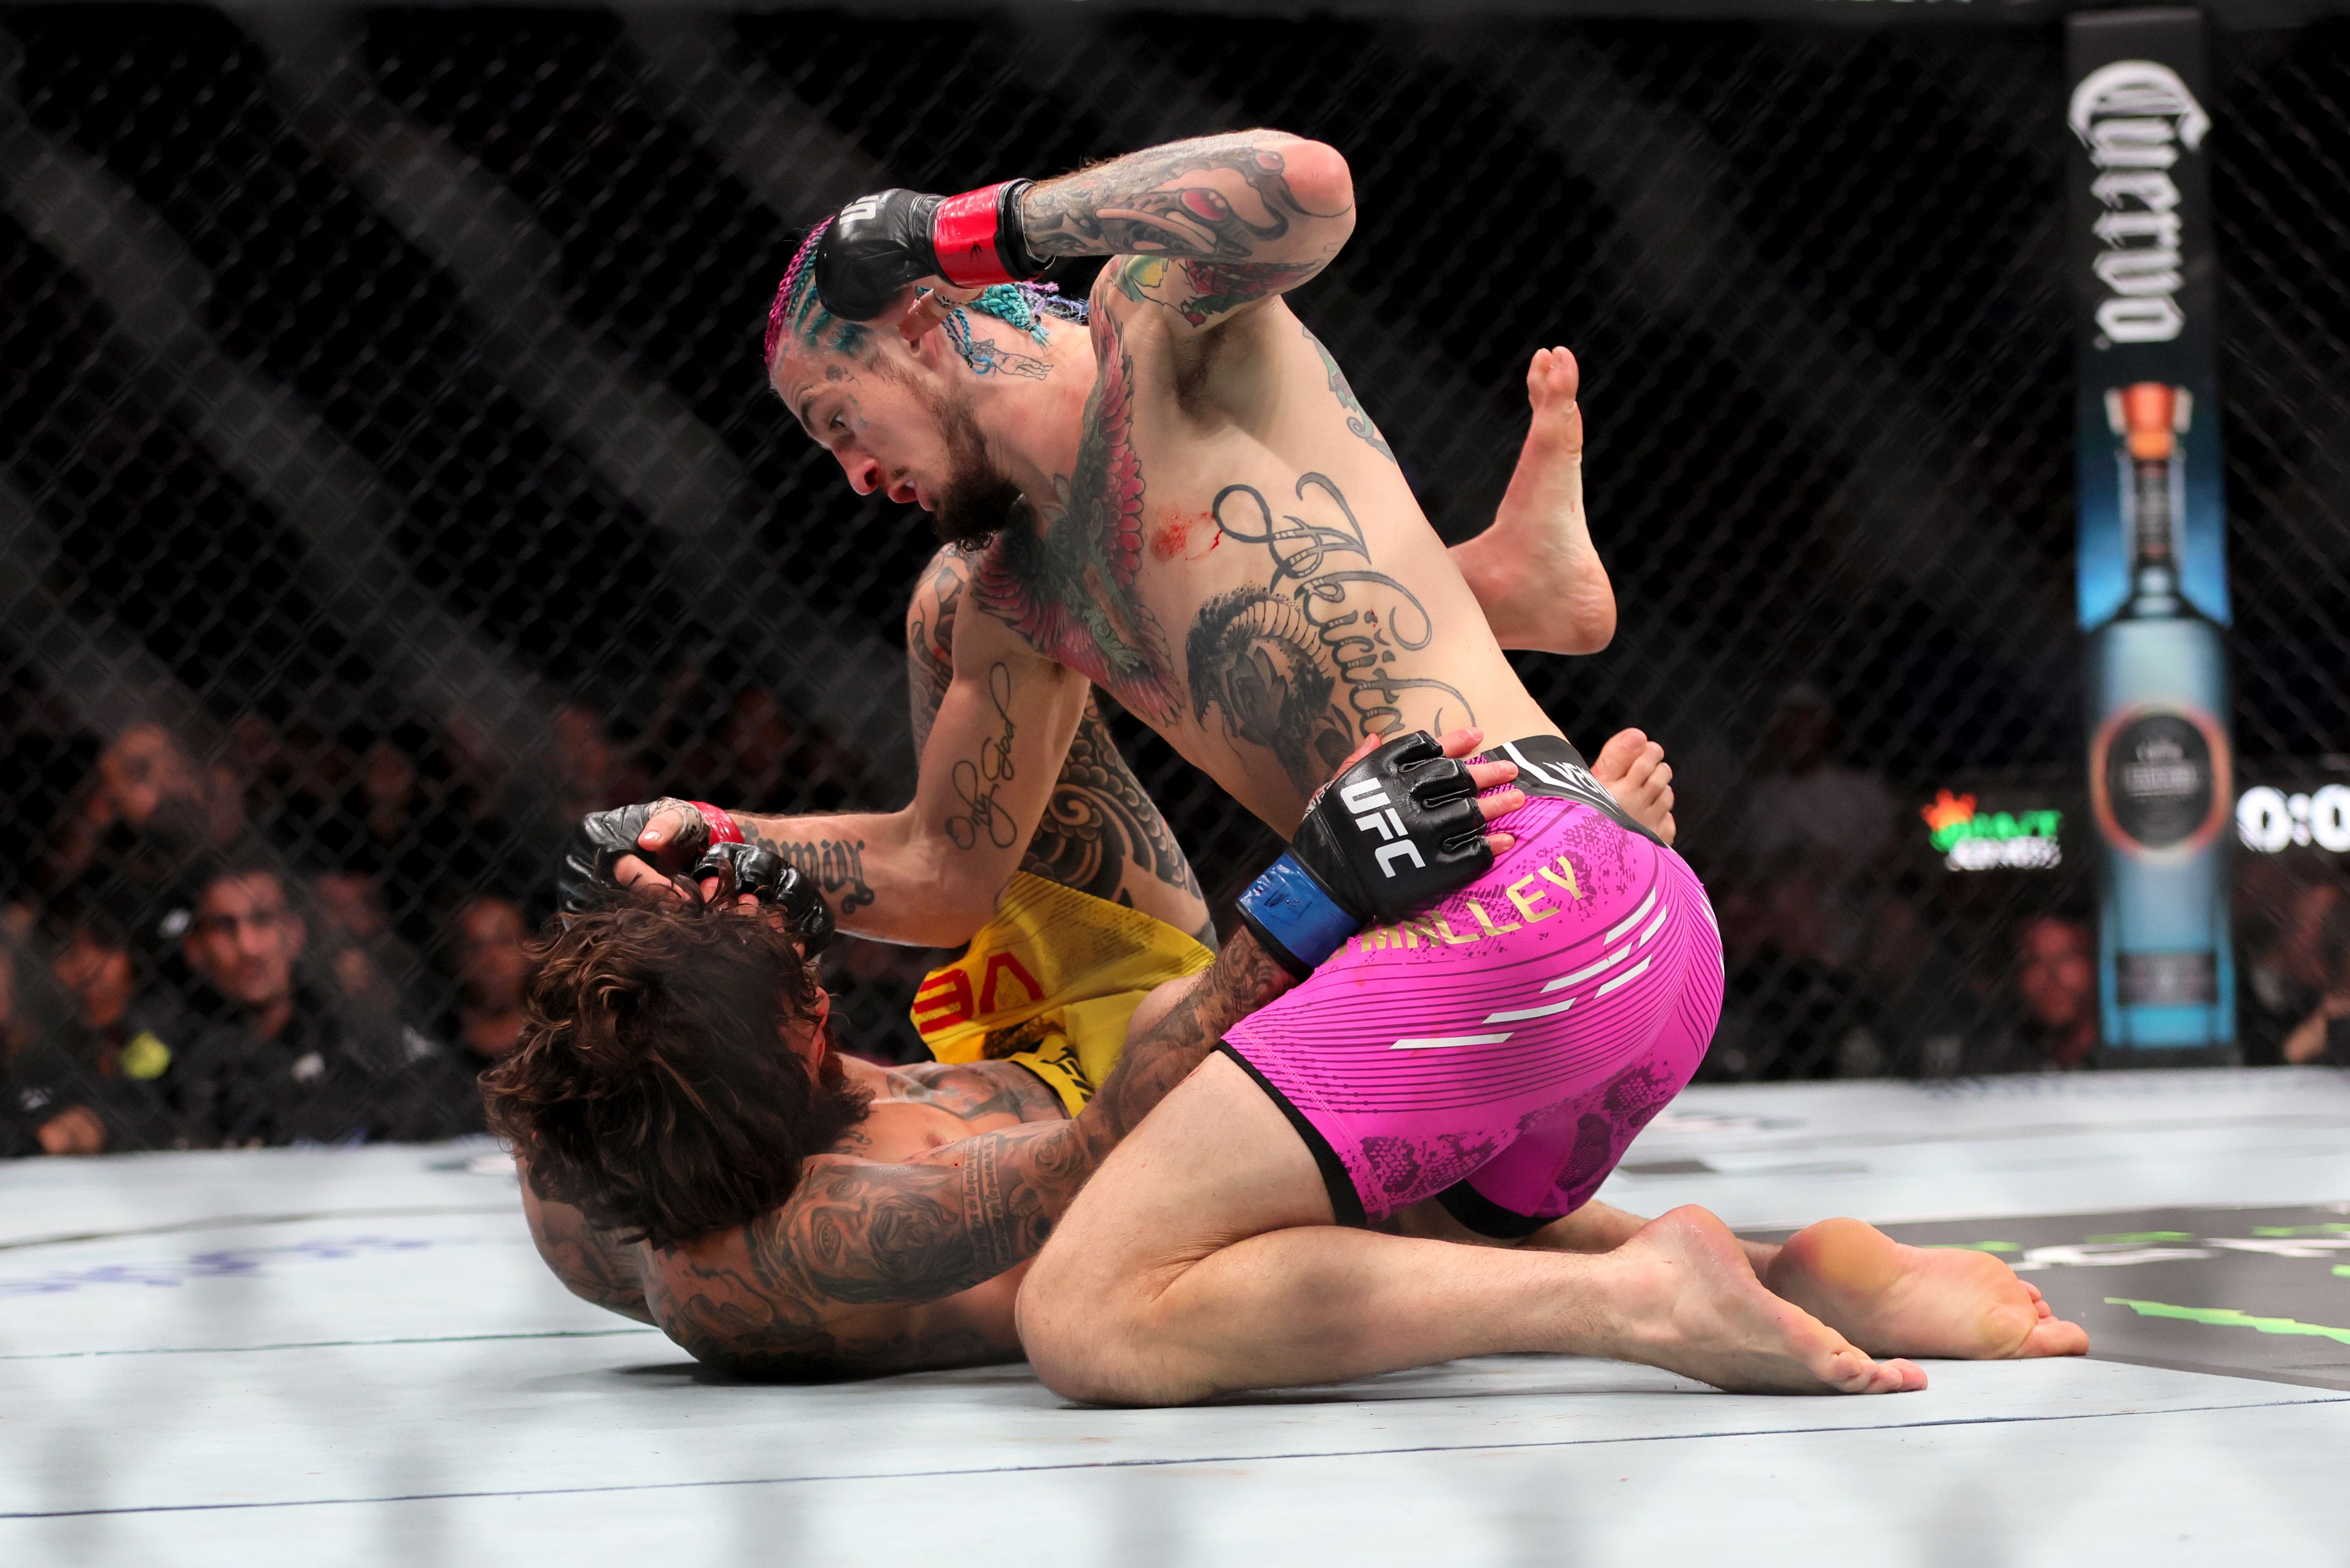 Which combat sport currently generates more money: MMA (UFC) or Boxing? -  Quora